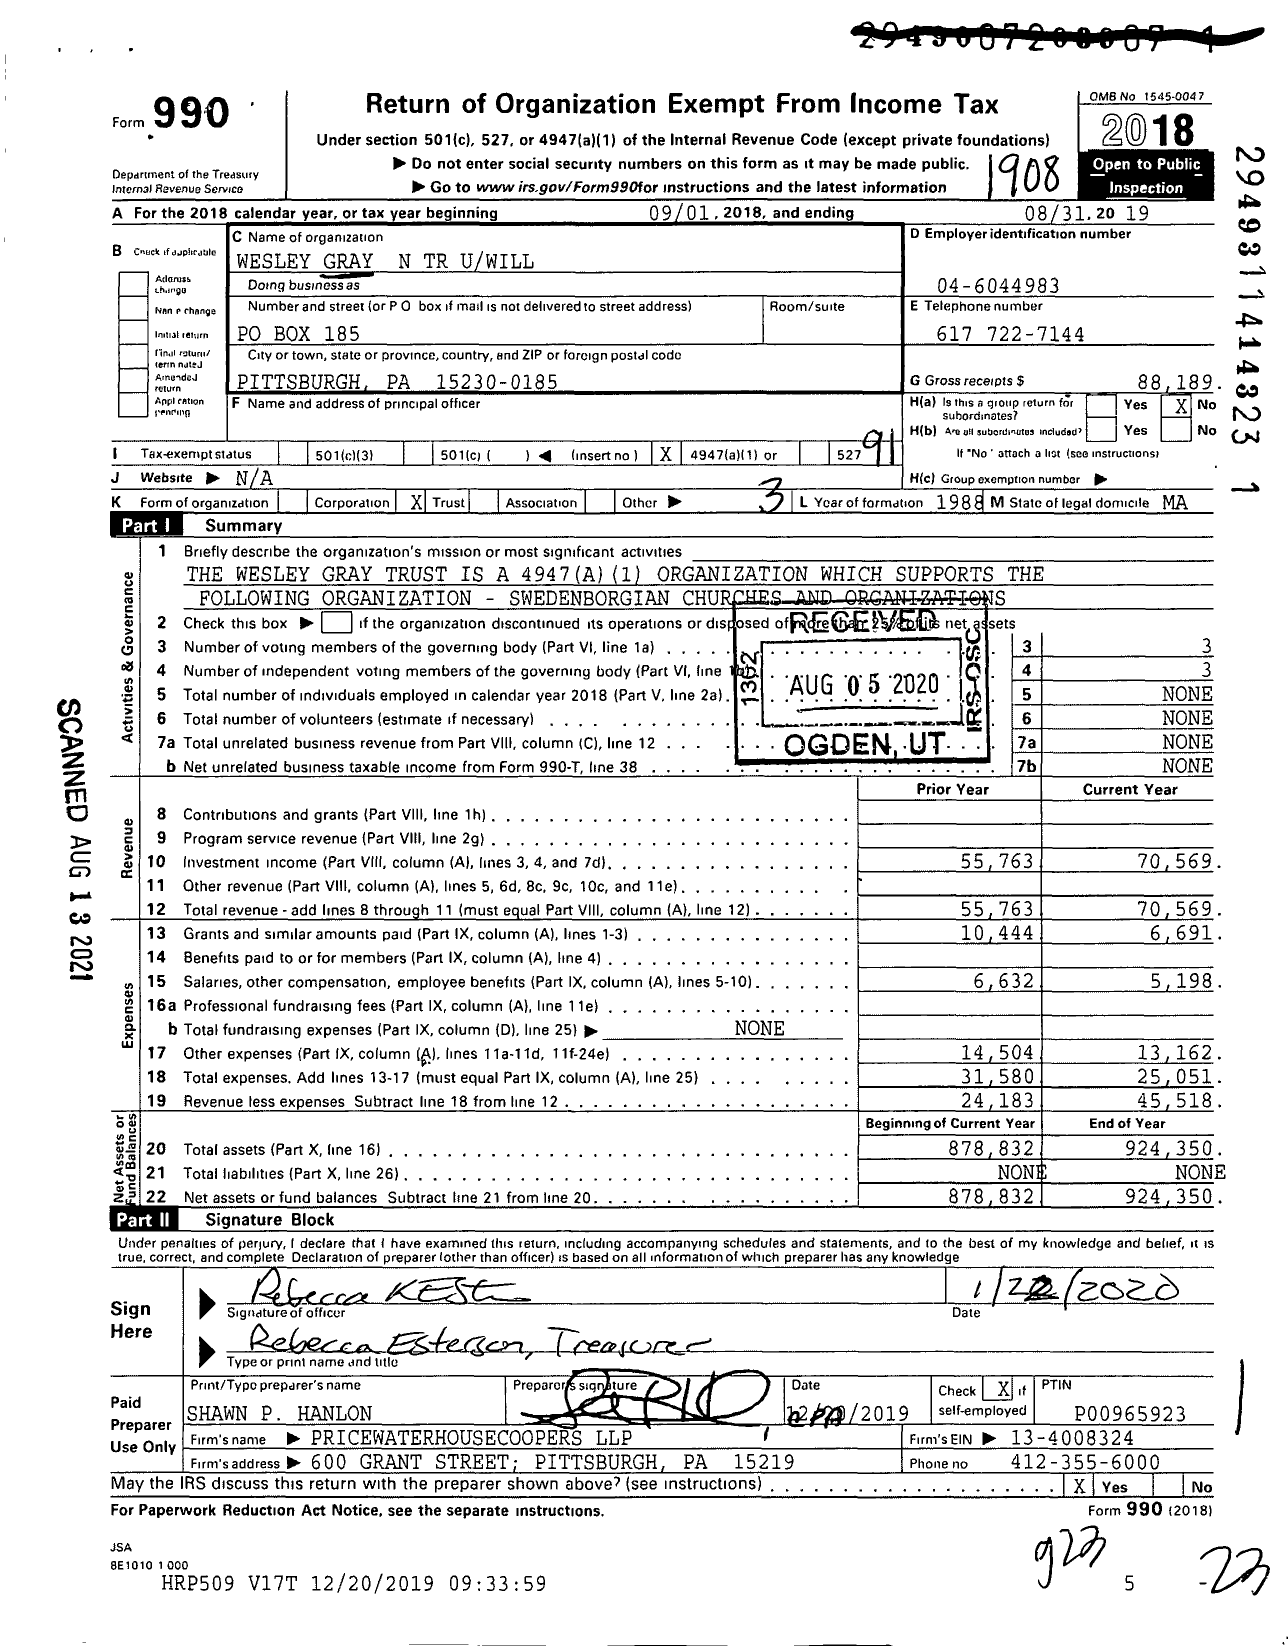 Image of first page of 2018 Form 990O for Wesley Gray N TR Uwill